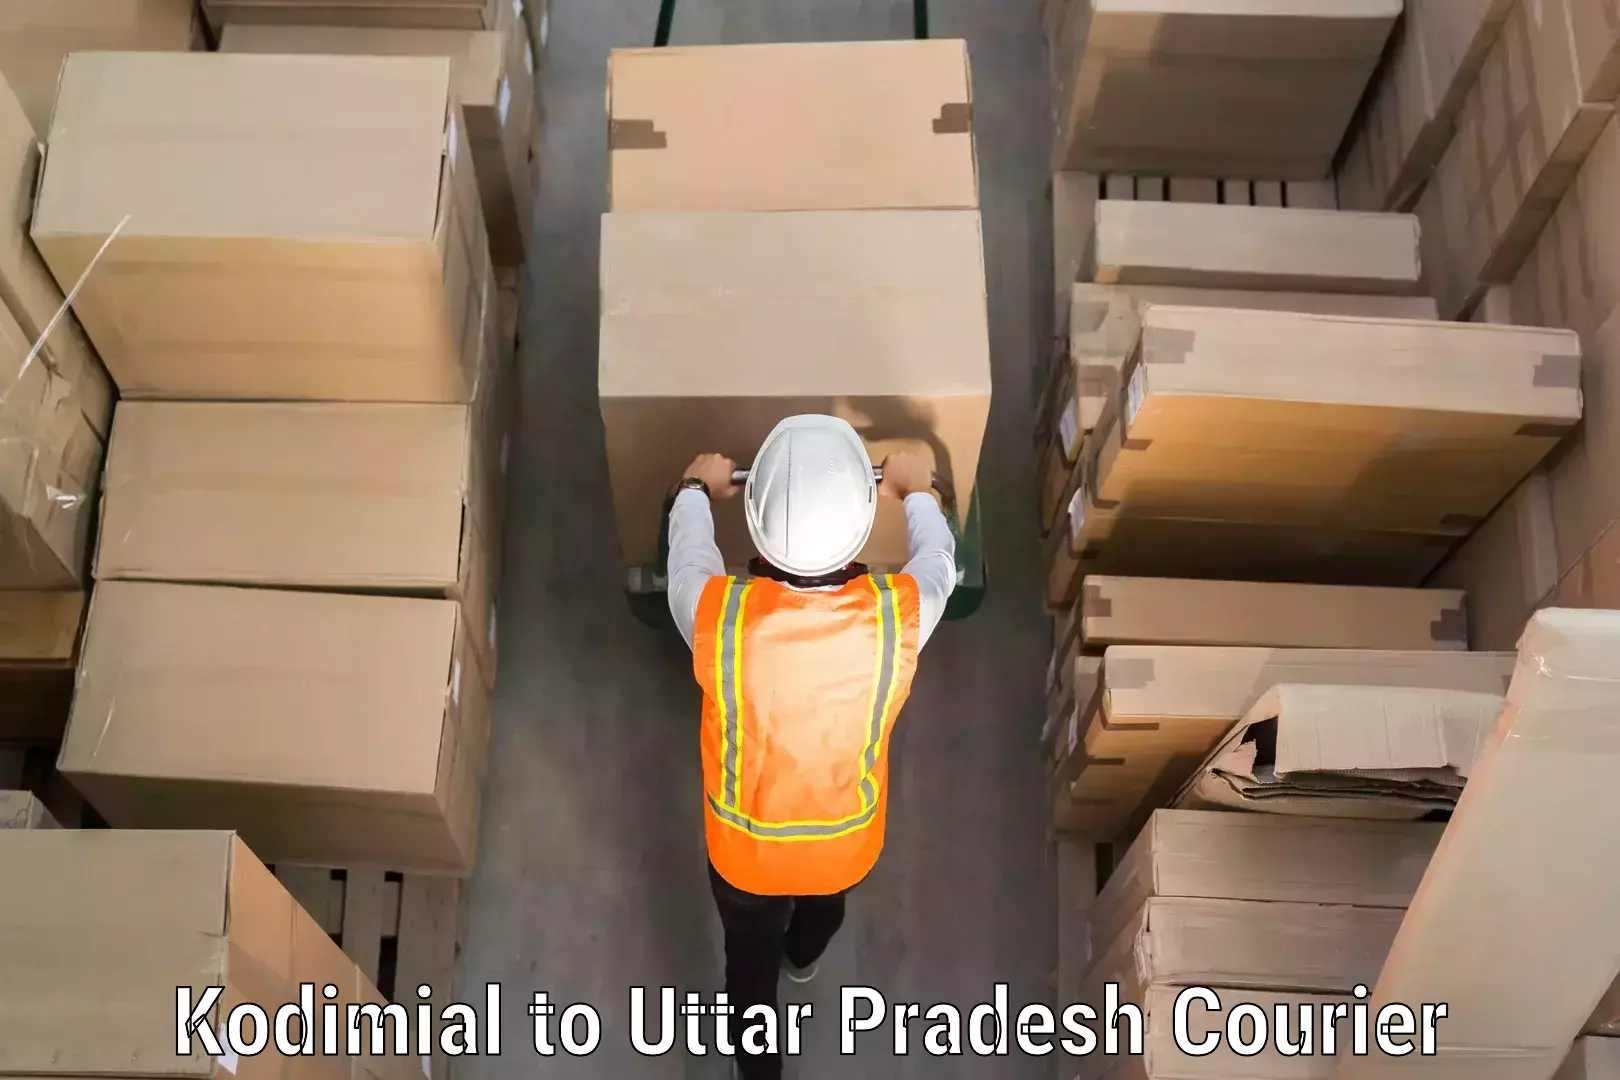 Baggage shipping service Kodimial to Fatehpur